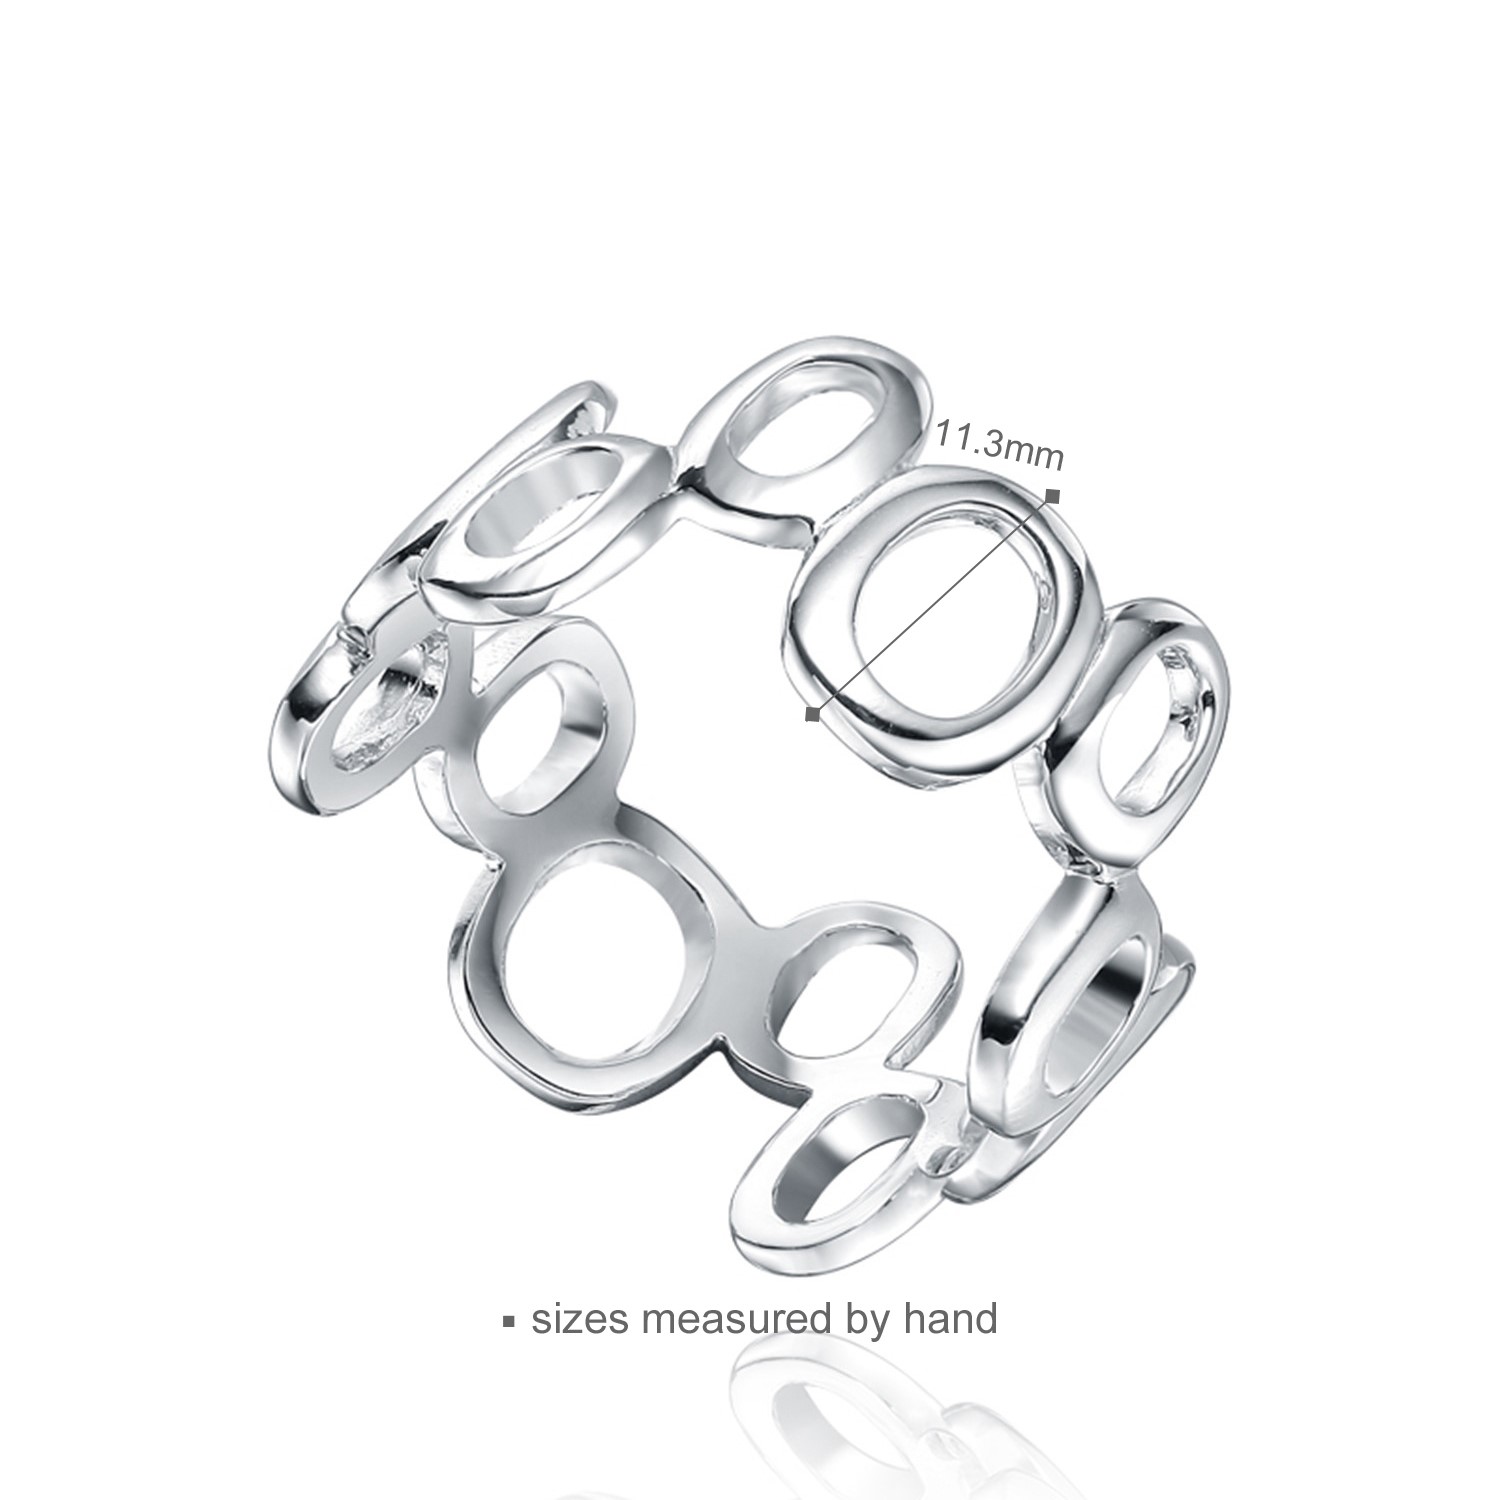 Fashion ring 925 Sterling Silver jewelry Simple Carve O shape Band Eternity Hollow Ring Women Gifts(图3)